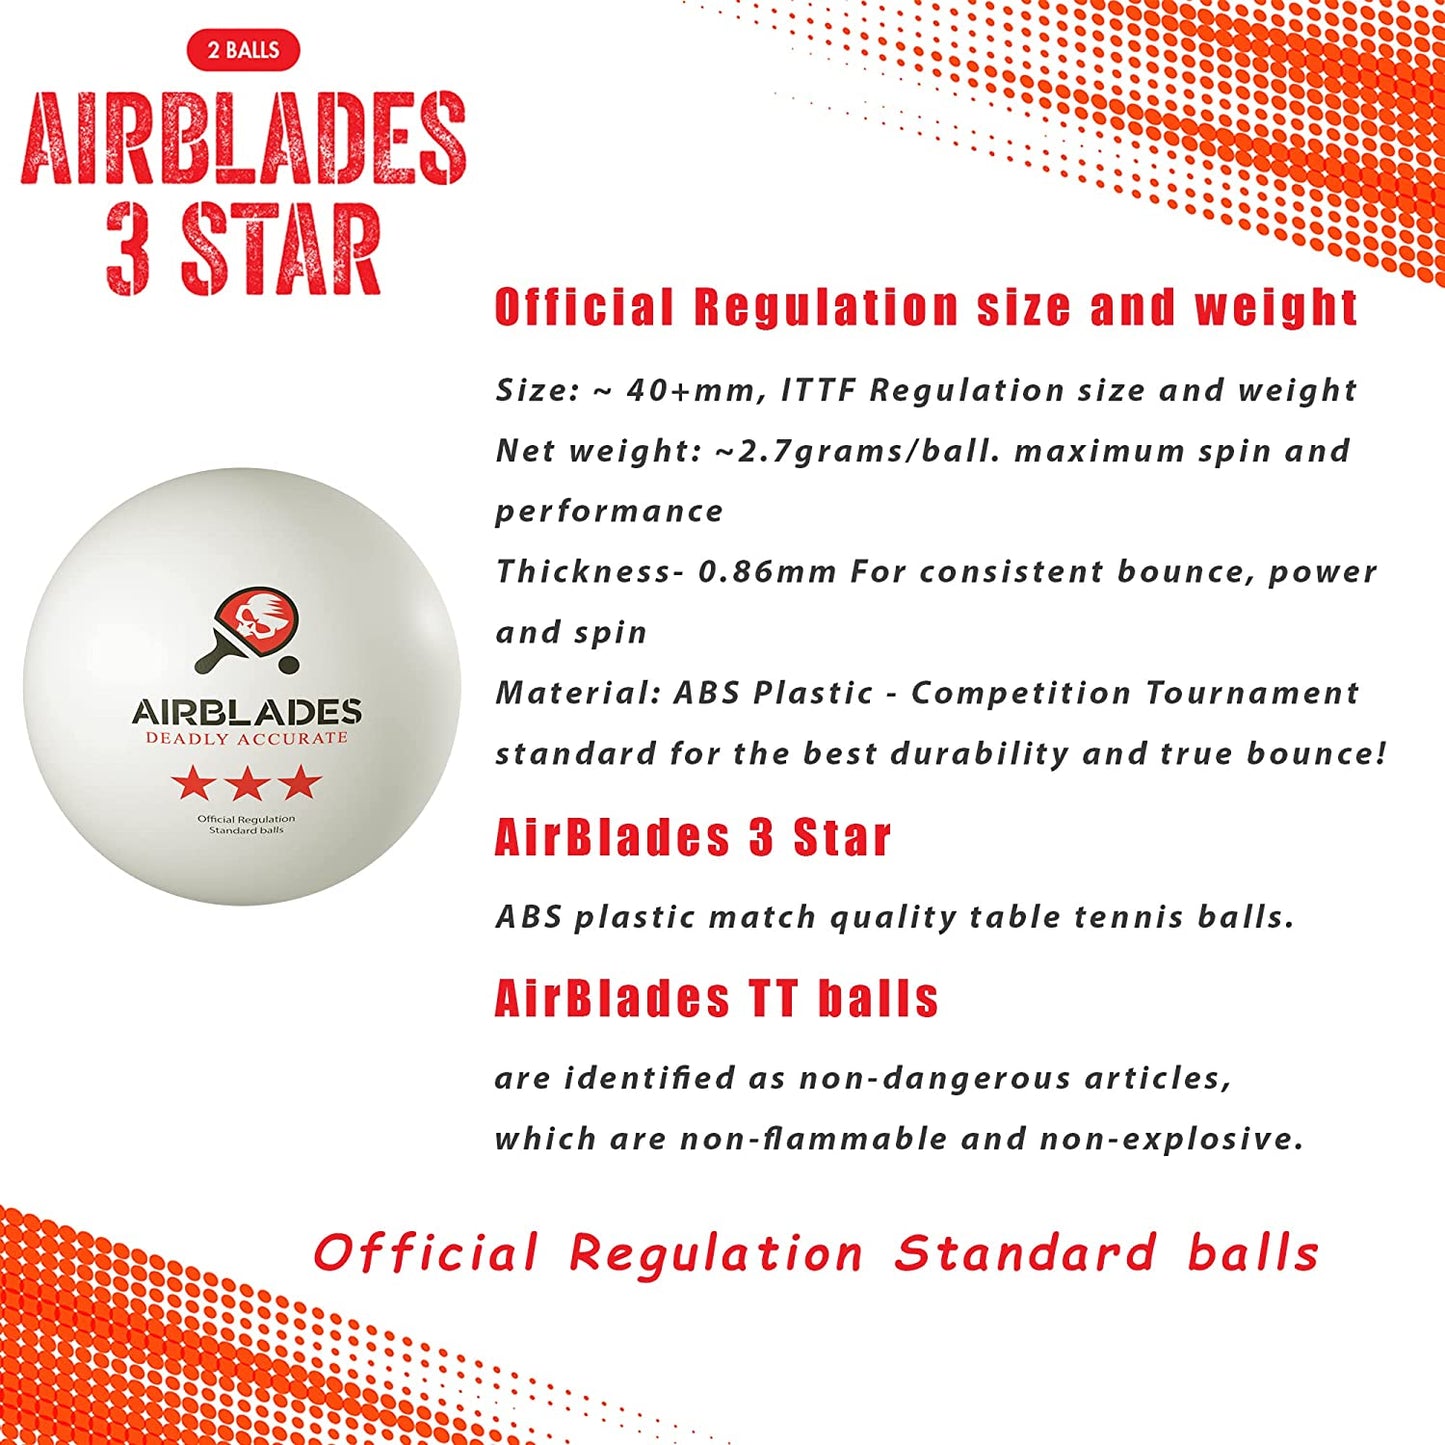 AirBlades 3 Star Ping Pong Balls | High Performance, Table Tennis Balls for Tournament Play & Training | Advanced ABS Plastic | Regulation Standard Ping Pong Balls - 2 Pack